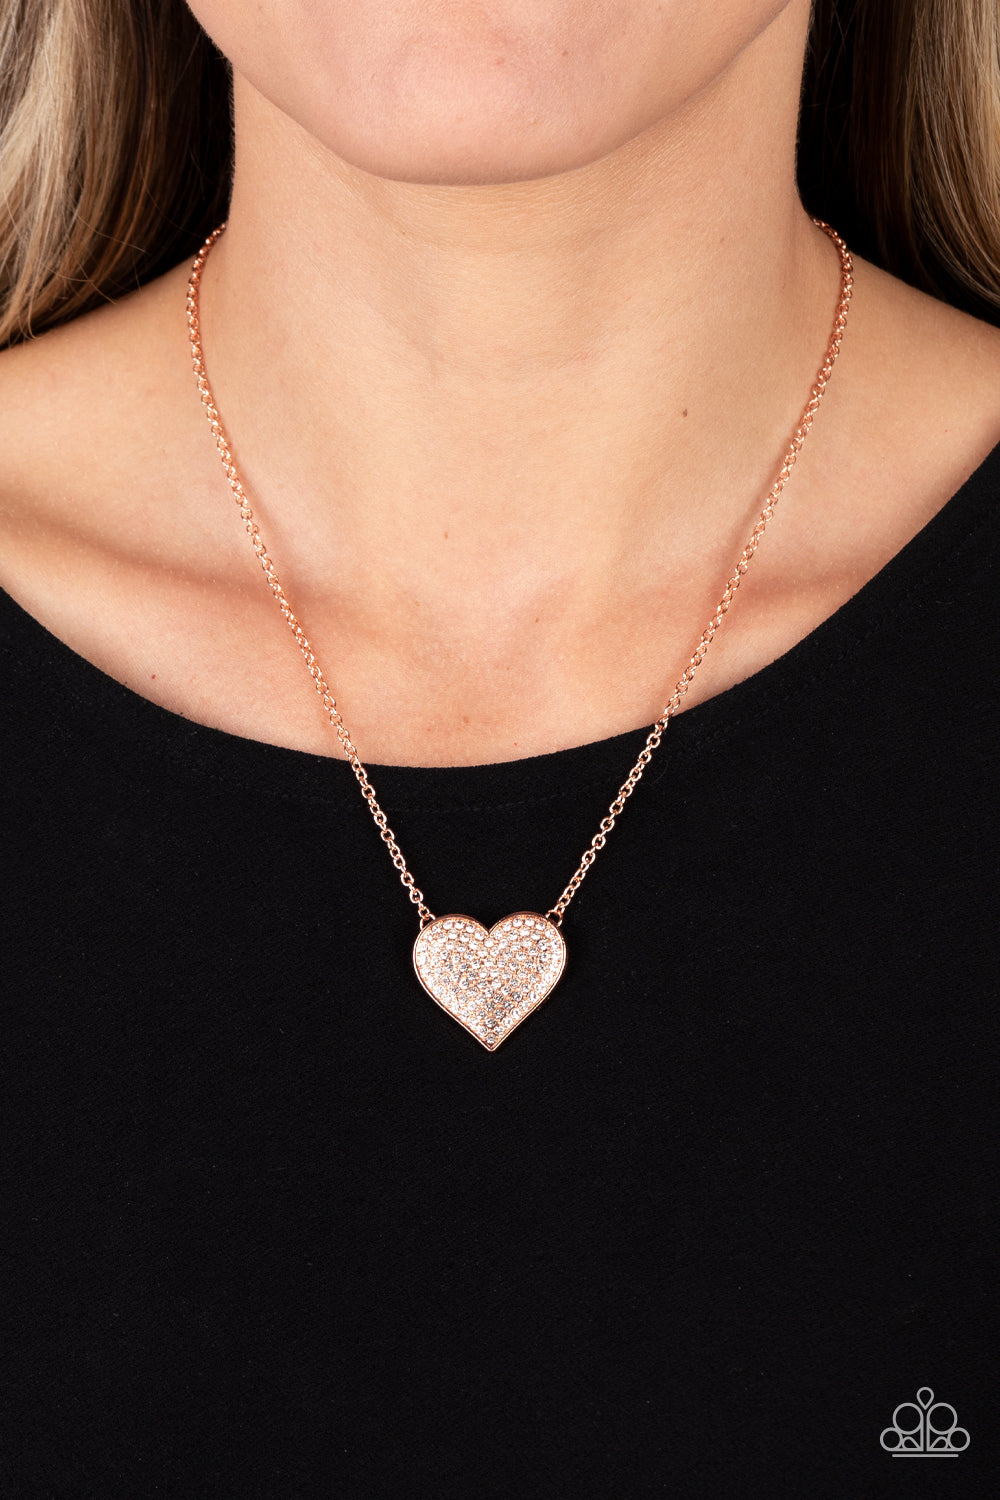 Paparazzi Accessories Spellbinding Sweetheart - Copper A heart-shaped pendant in a shiny copper finish is anchored between two strands of delicate chain in the same reflective finish. The interior of the heart is filled with glittery white rhinestones, in